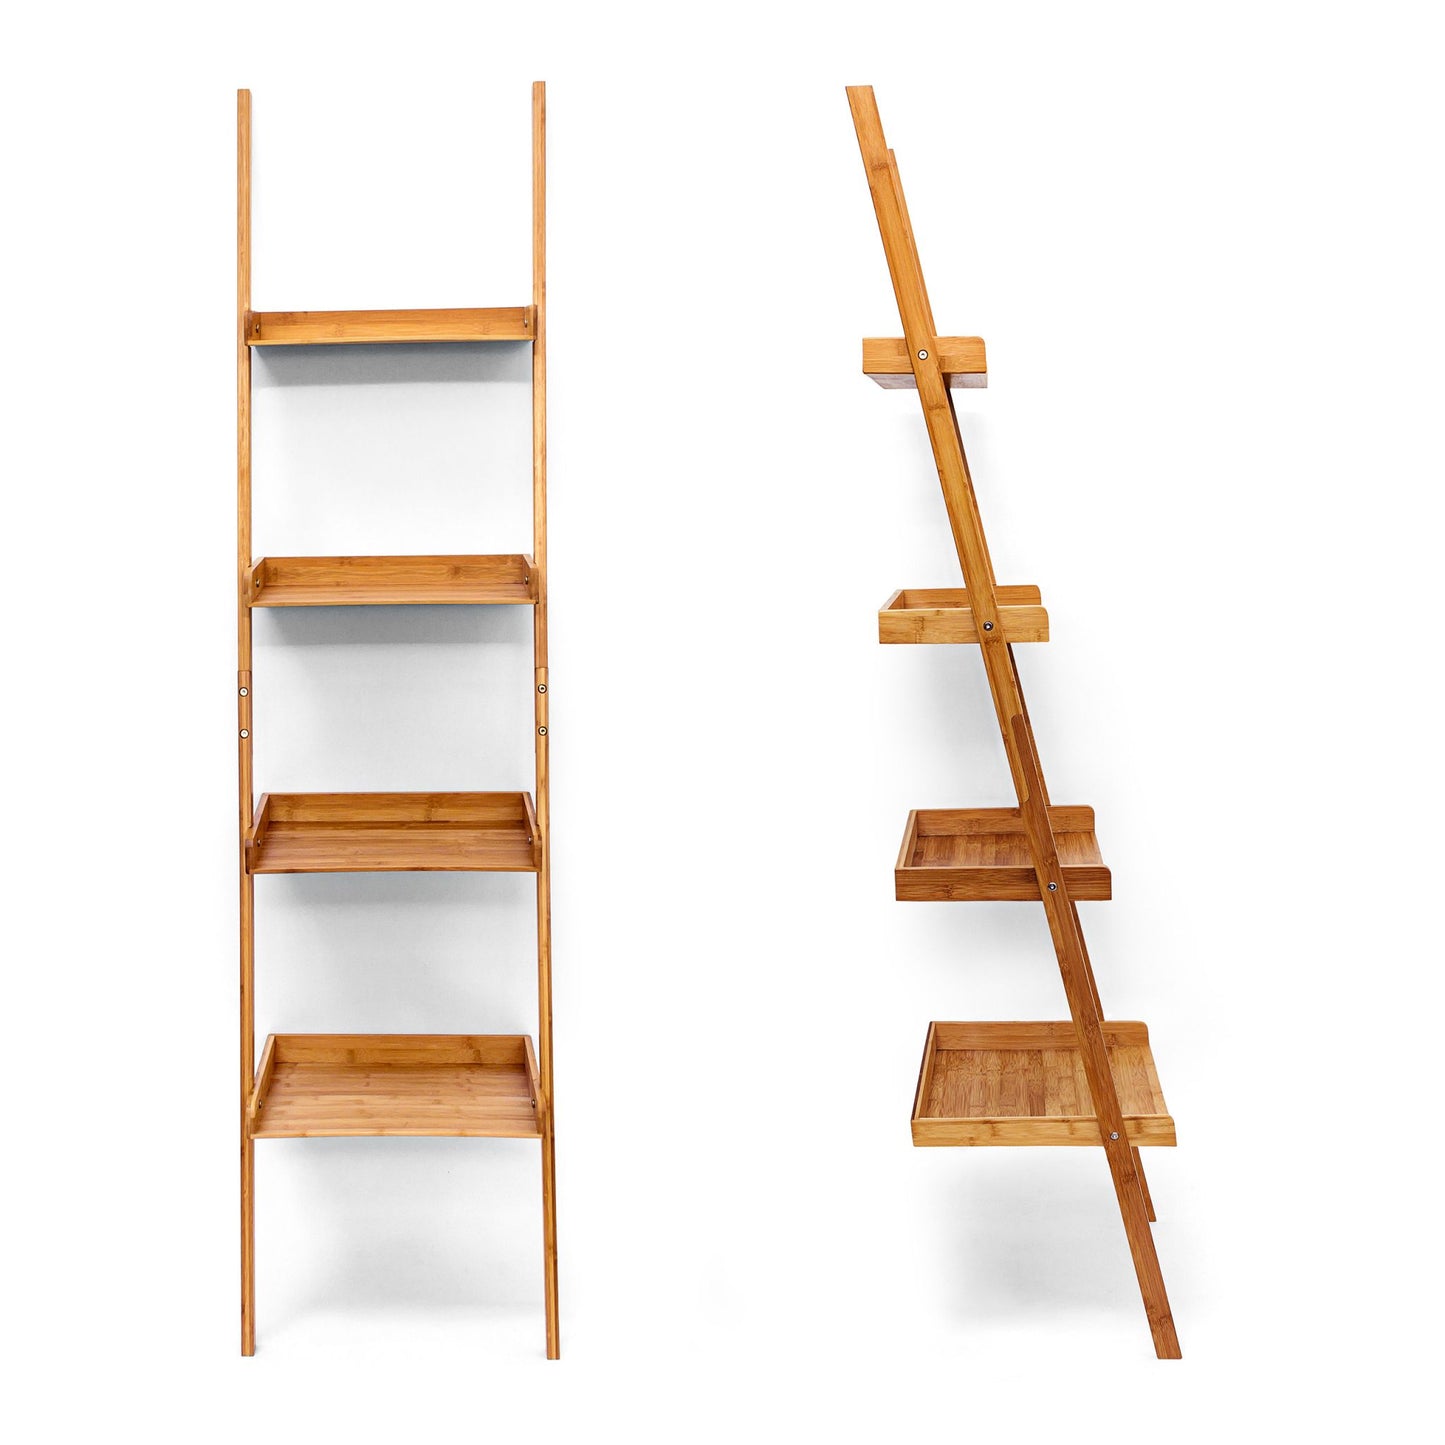 RelaxDays Bamboo ladder shelving unit, 4 tiers Bamboo Bathrooms